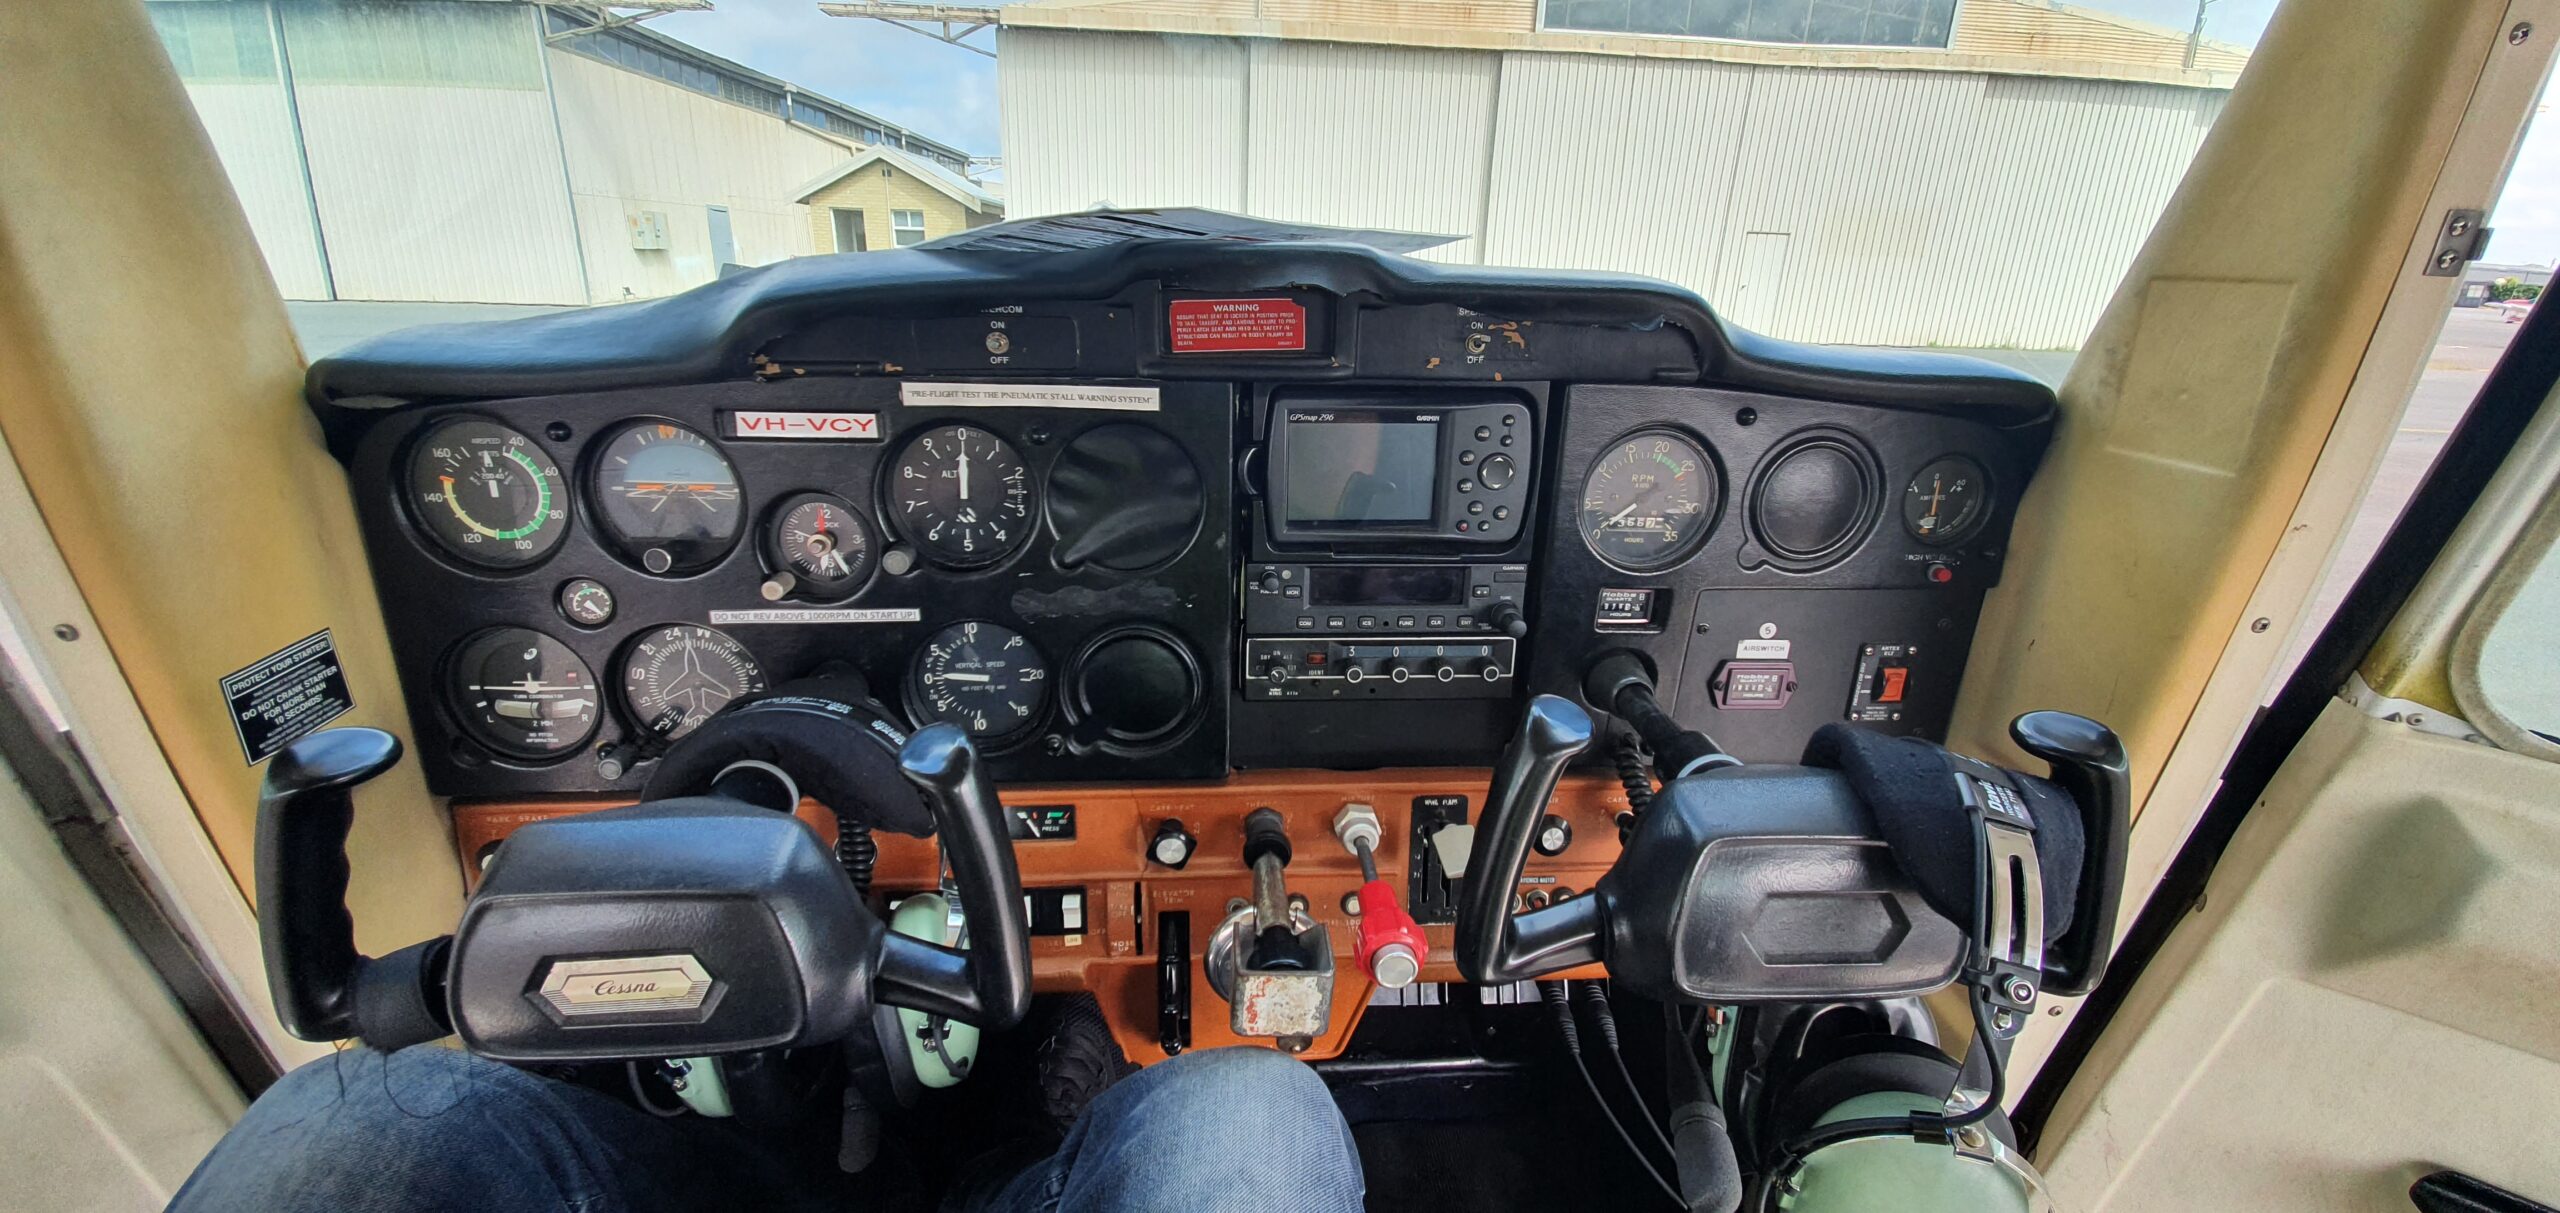 First Flight – Effects of Controls